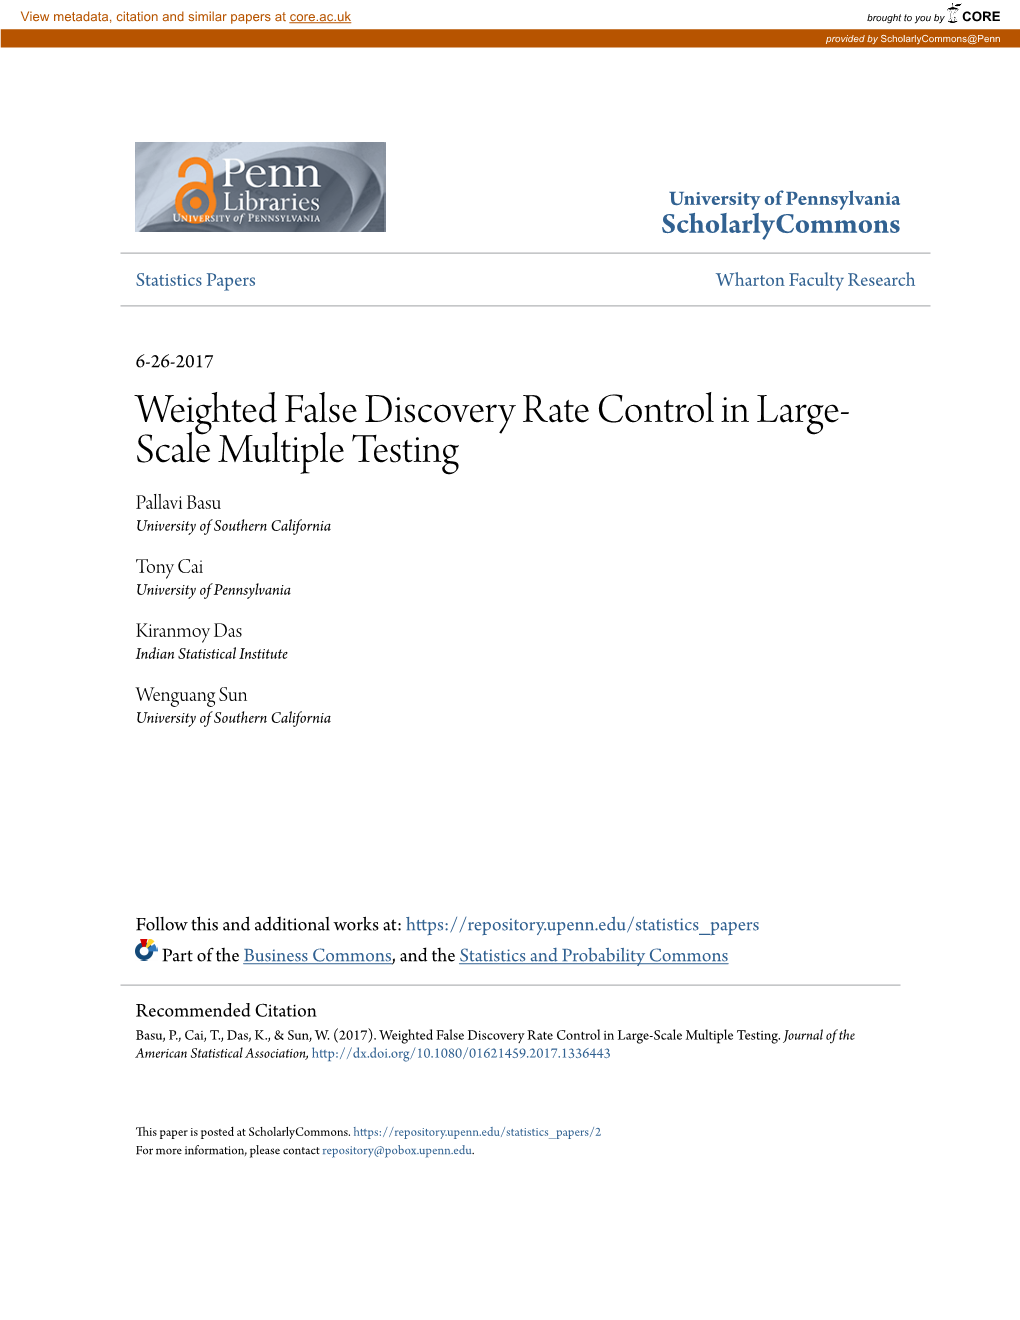 Weighted False Discovery Rate Control in Large-Scale Multiple Testing